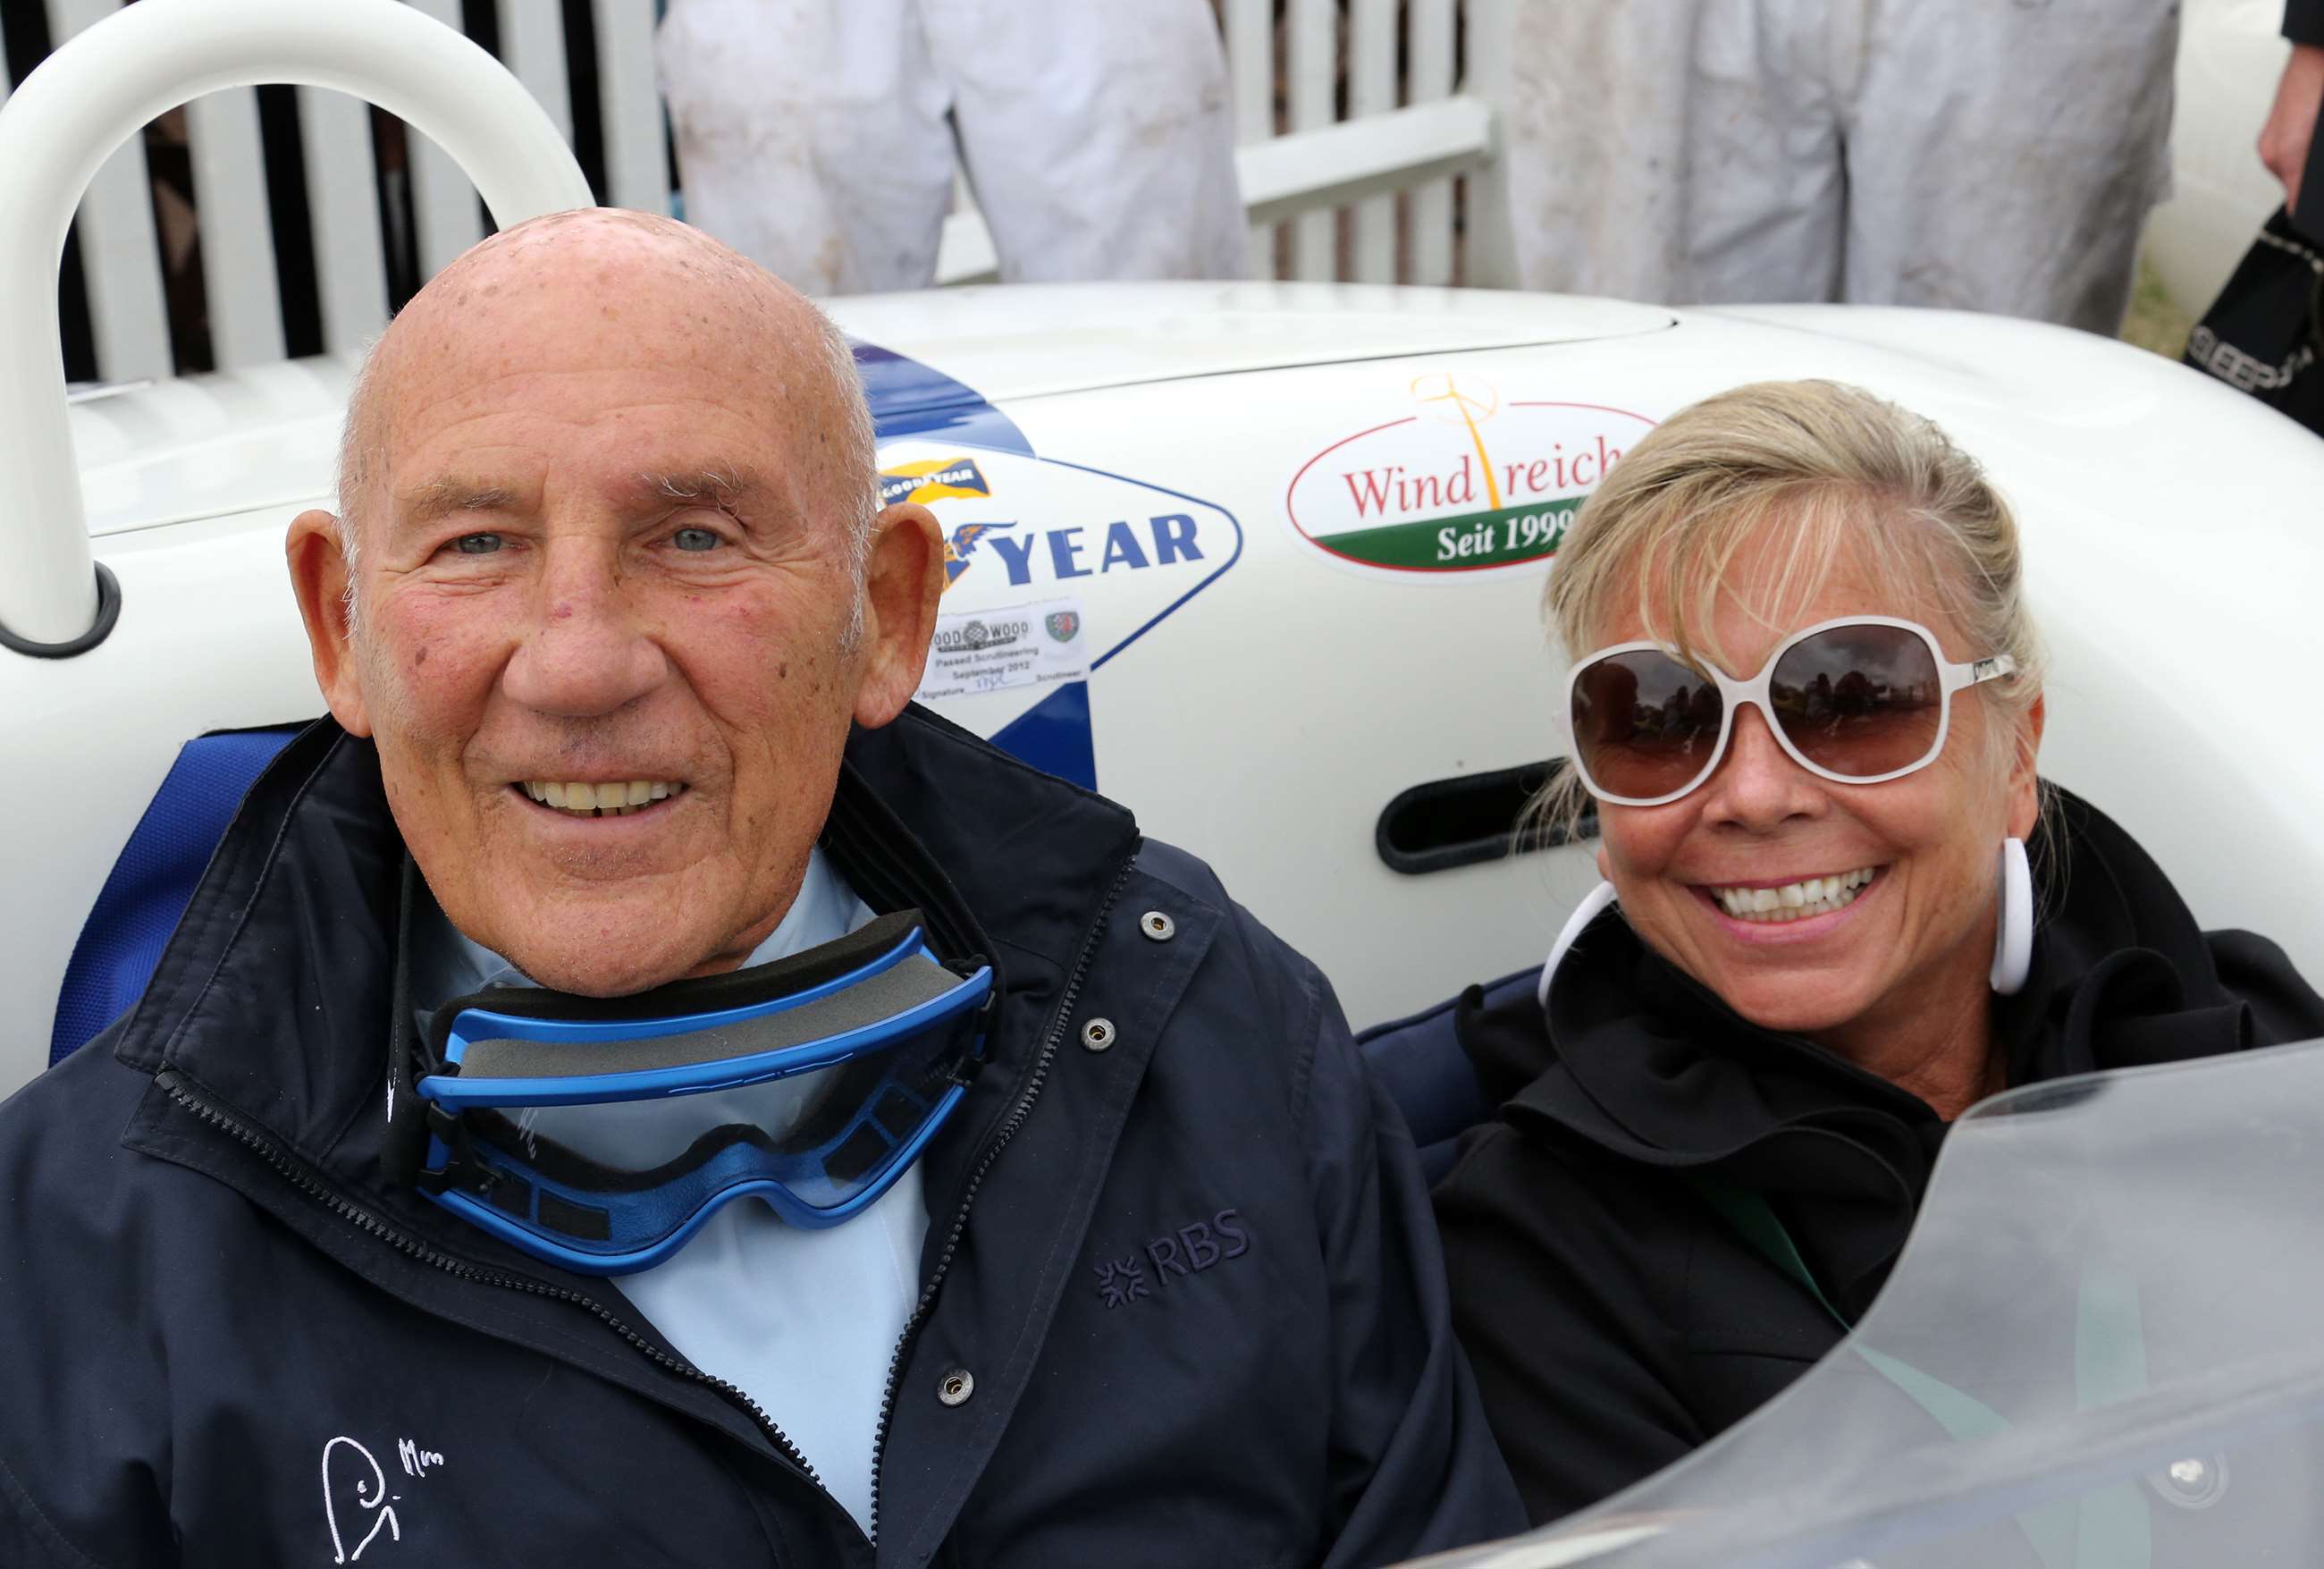 stirling-and-susie-moss-revival-2012-tom-boland-motorsport-images-goodwood-13092019.jpg